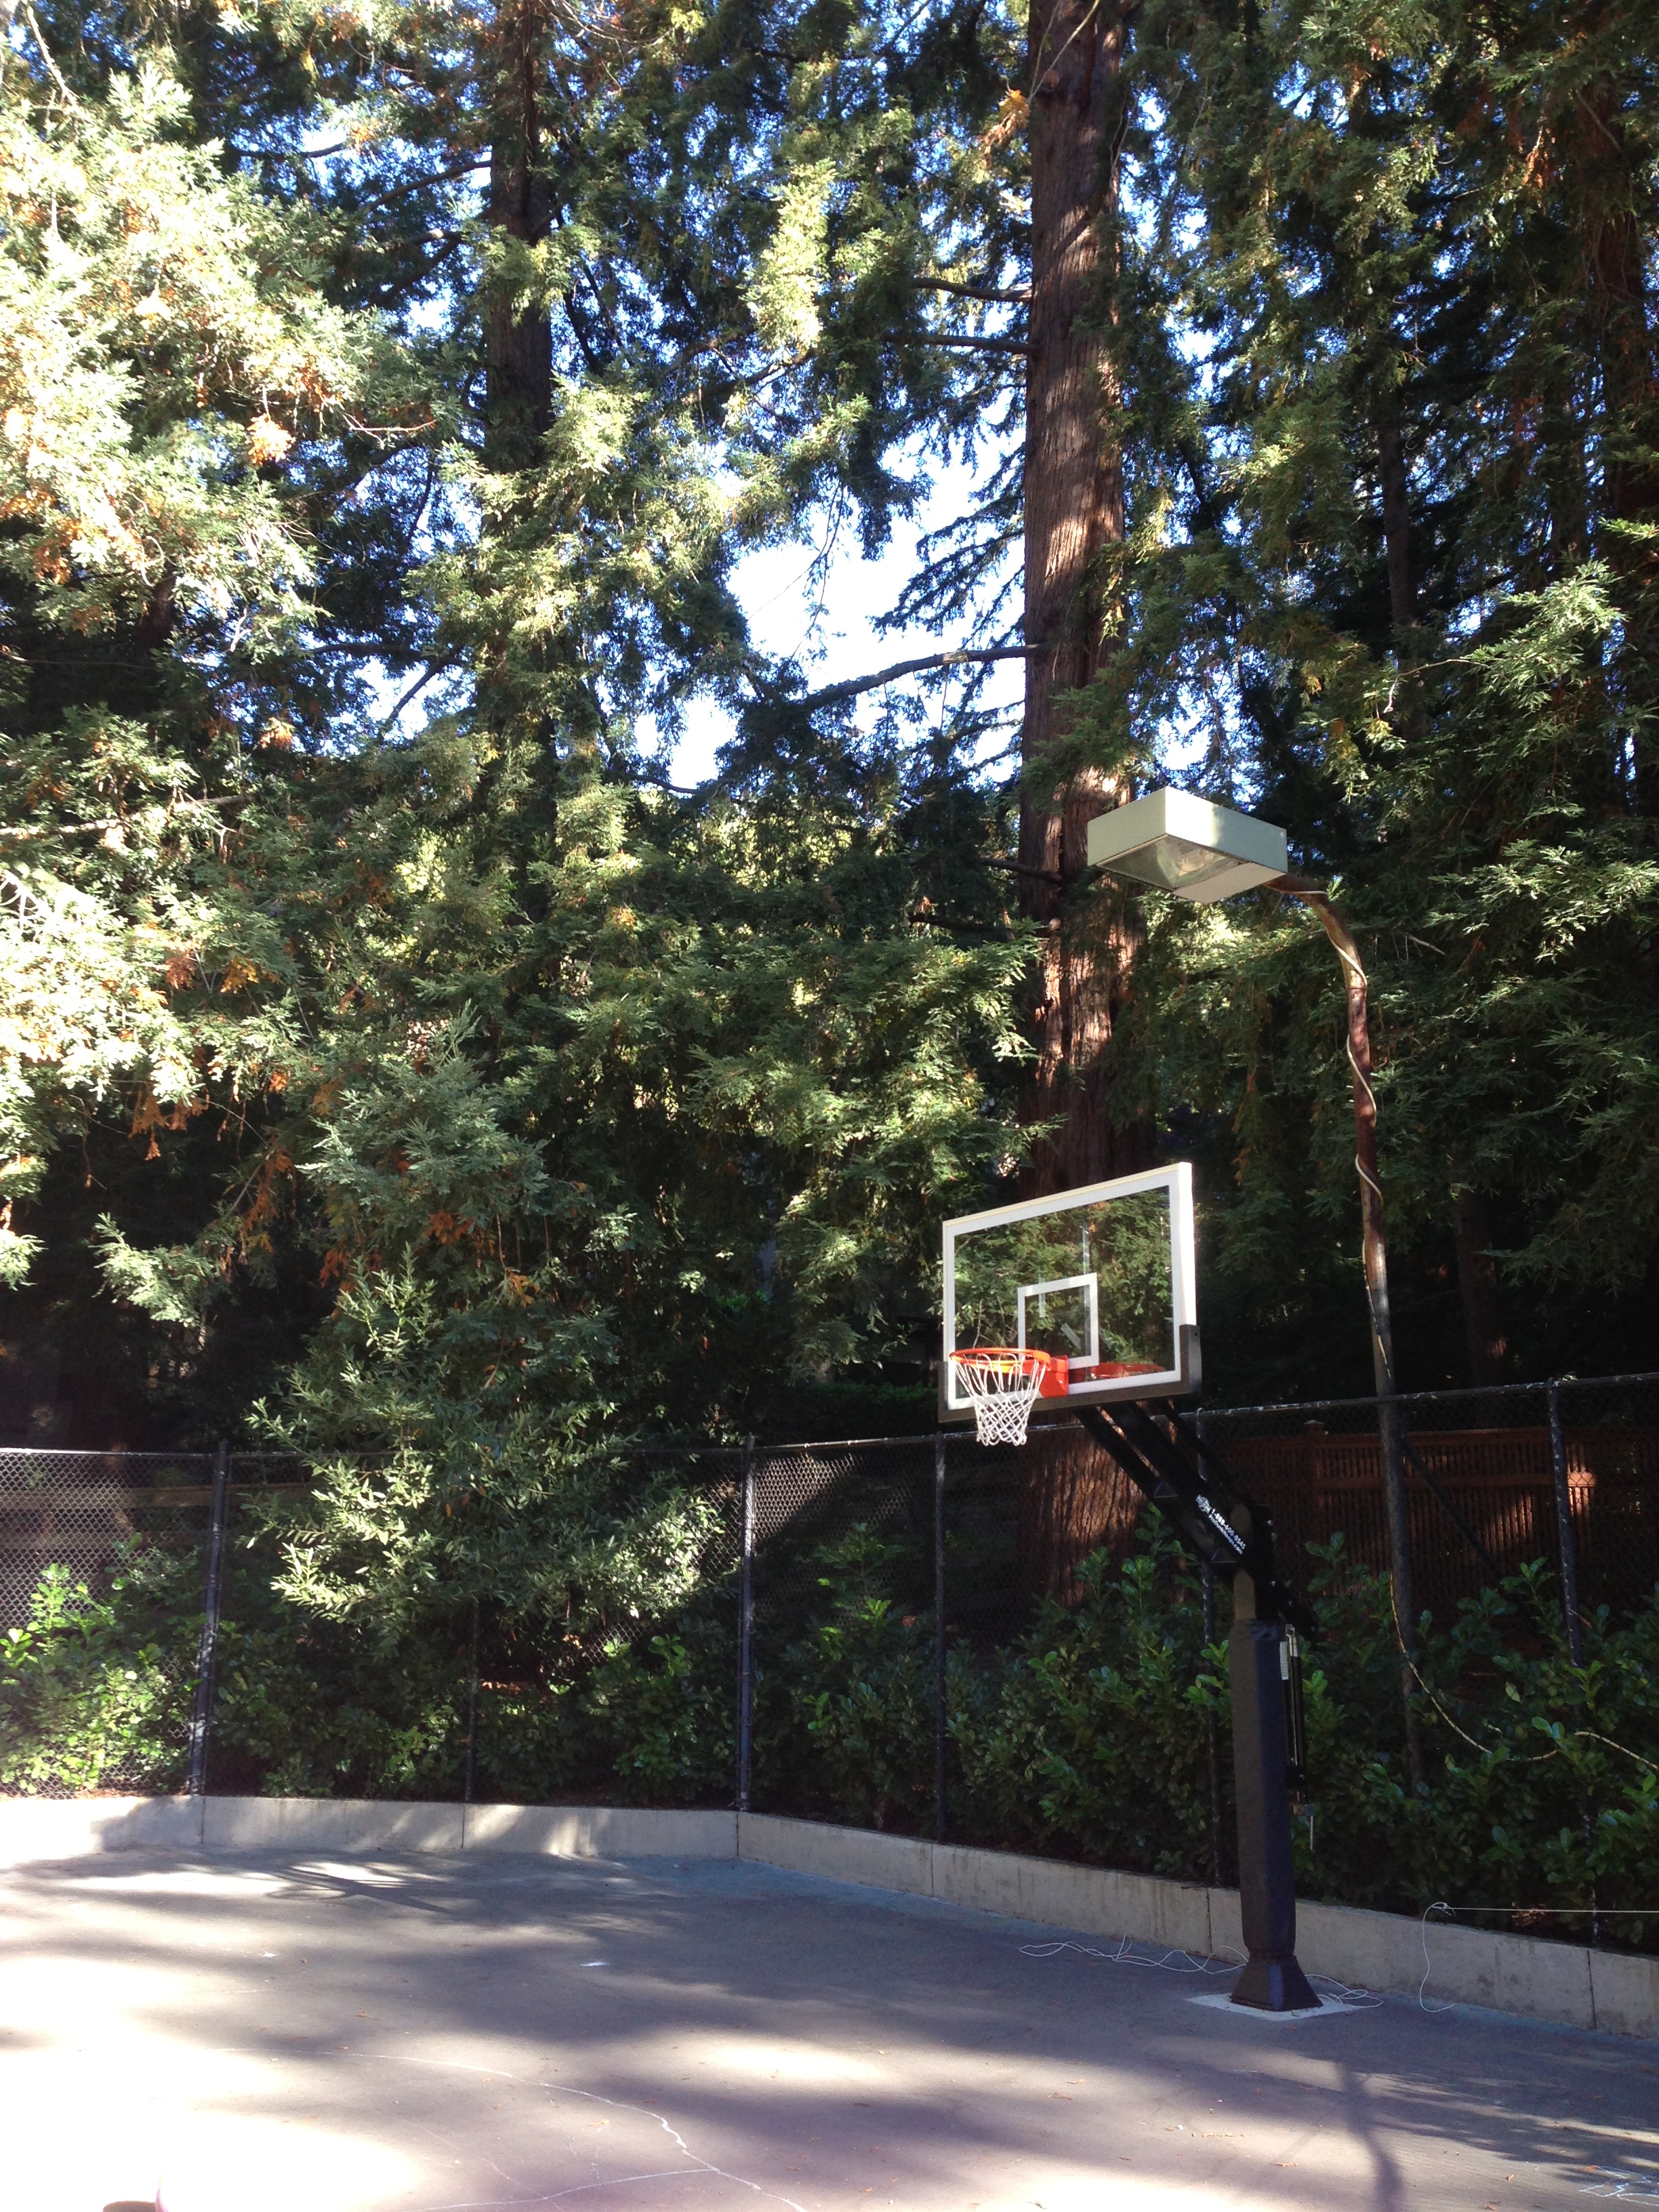 Looking at the Pro Dunk Platinum from an angle on a concrete slab in an evergreen forest.